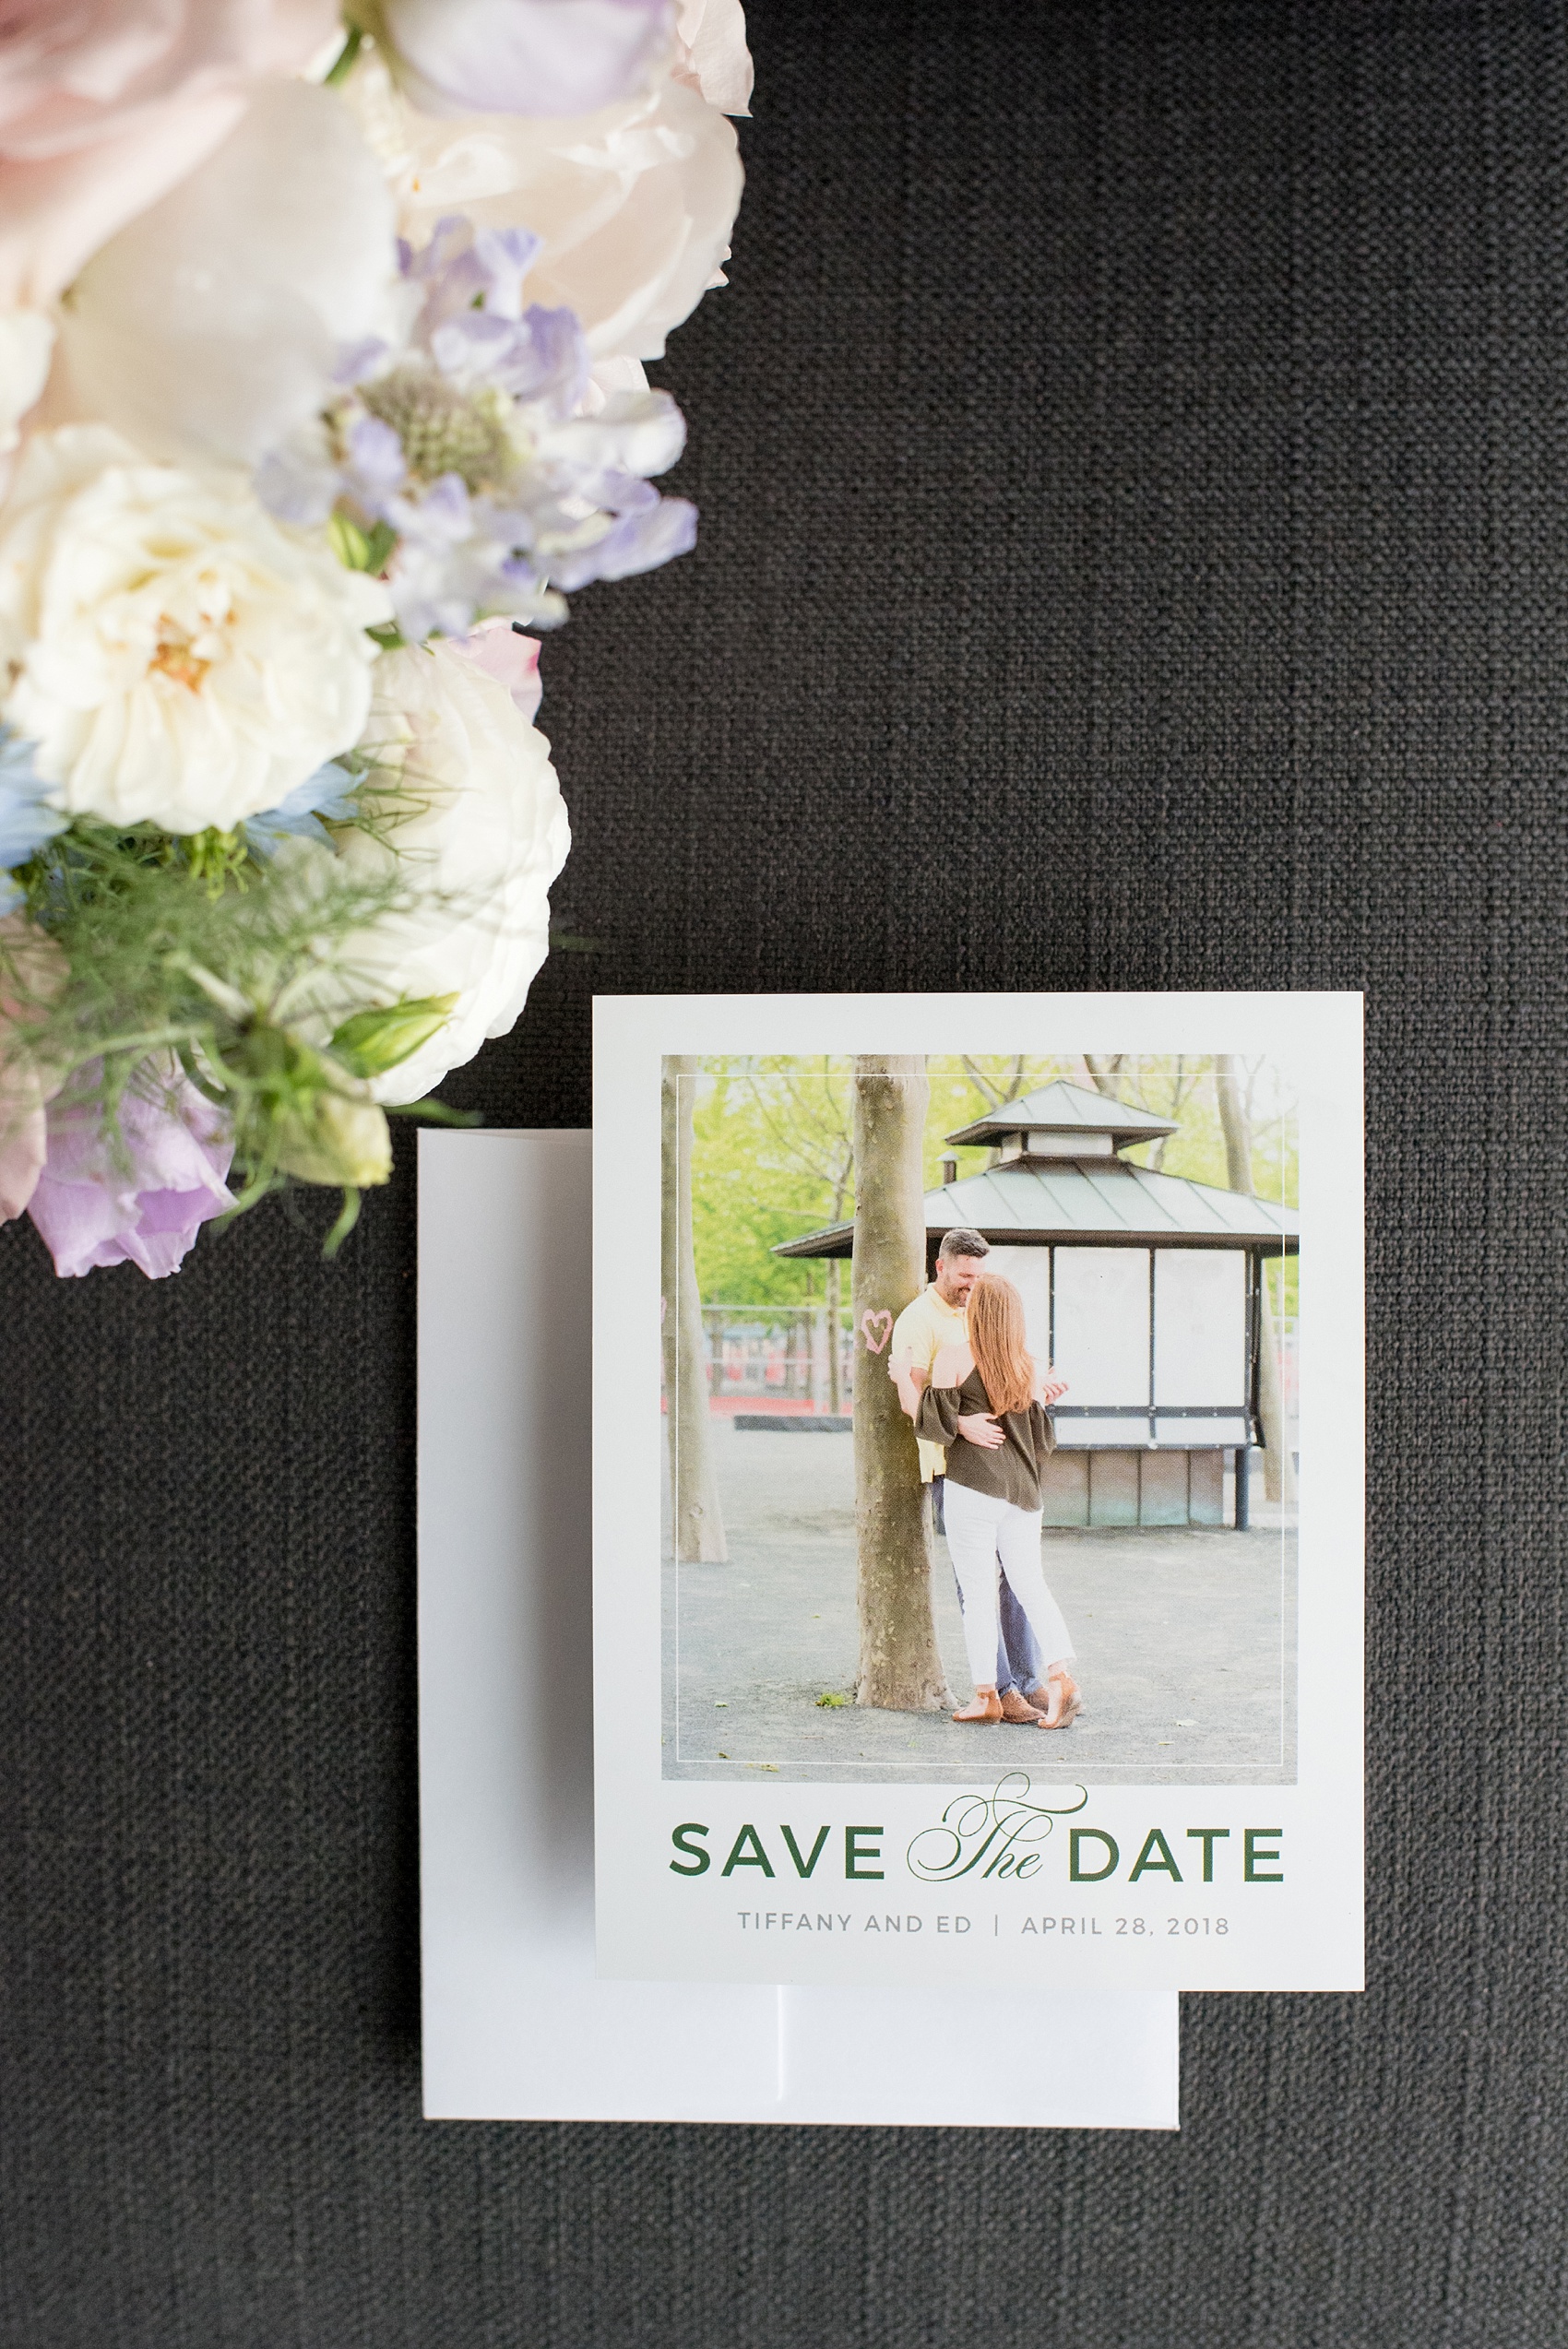 Mikkel Paige Photography images of Save the Date ideas, using Basic Invites online stationery boutique. Photos of a magnet option.